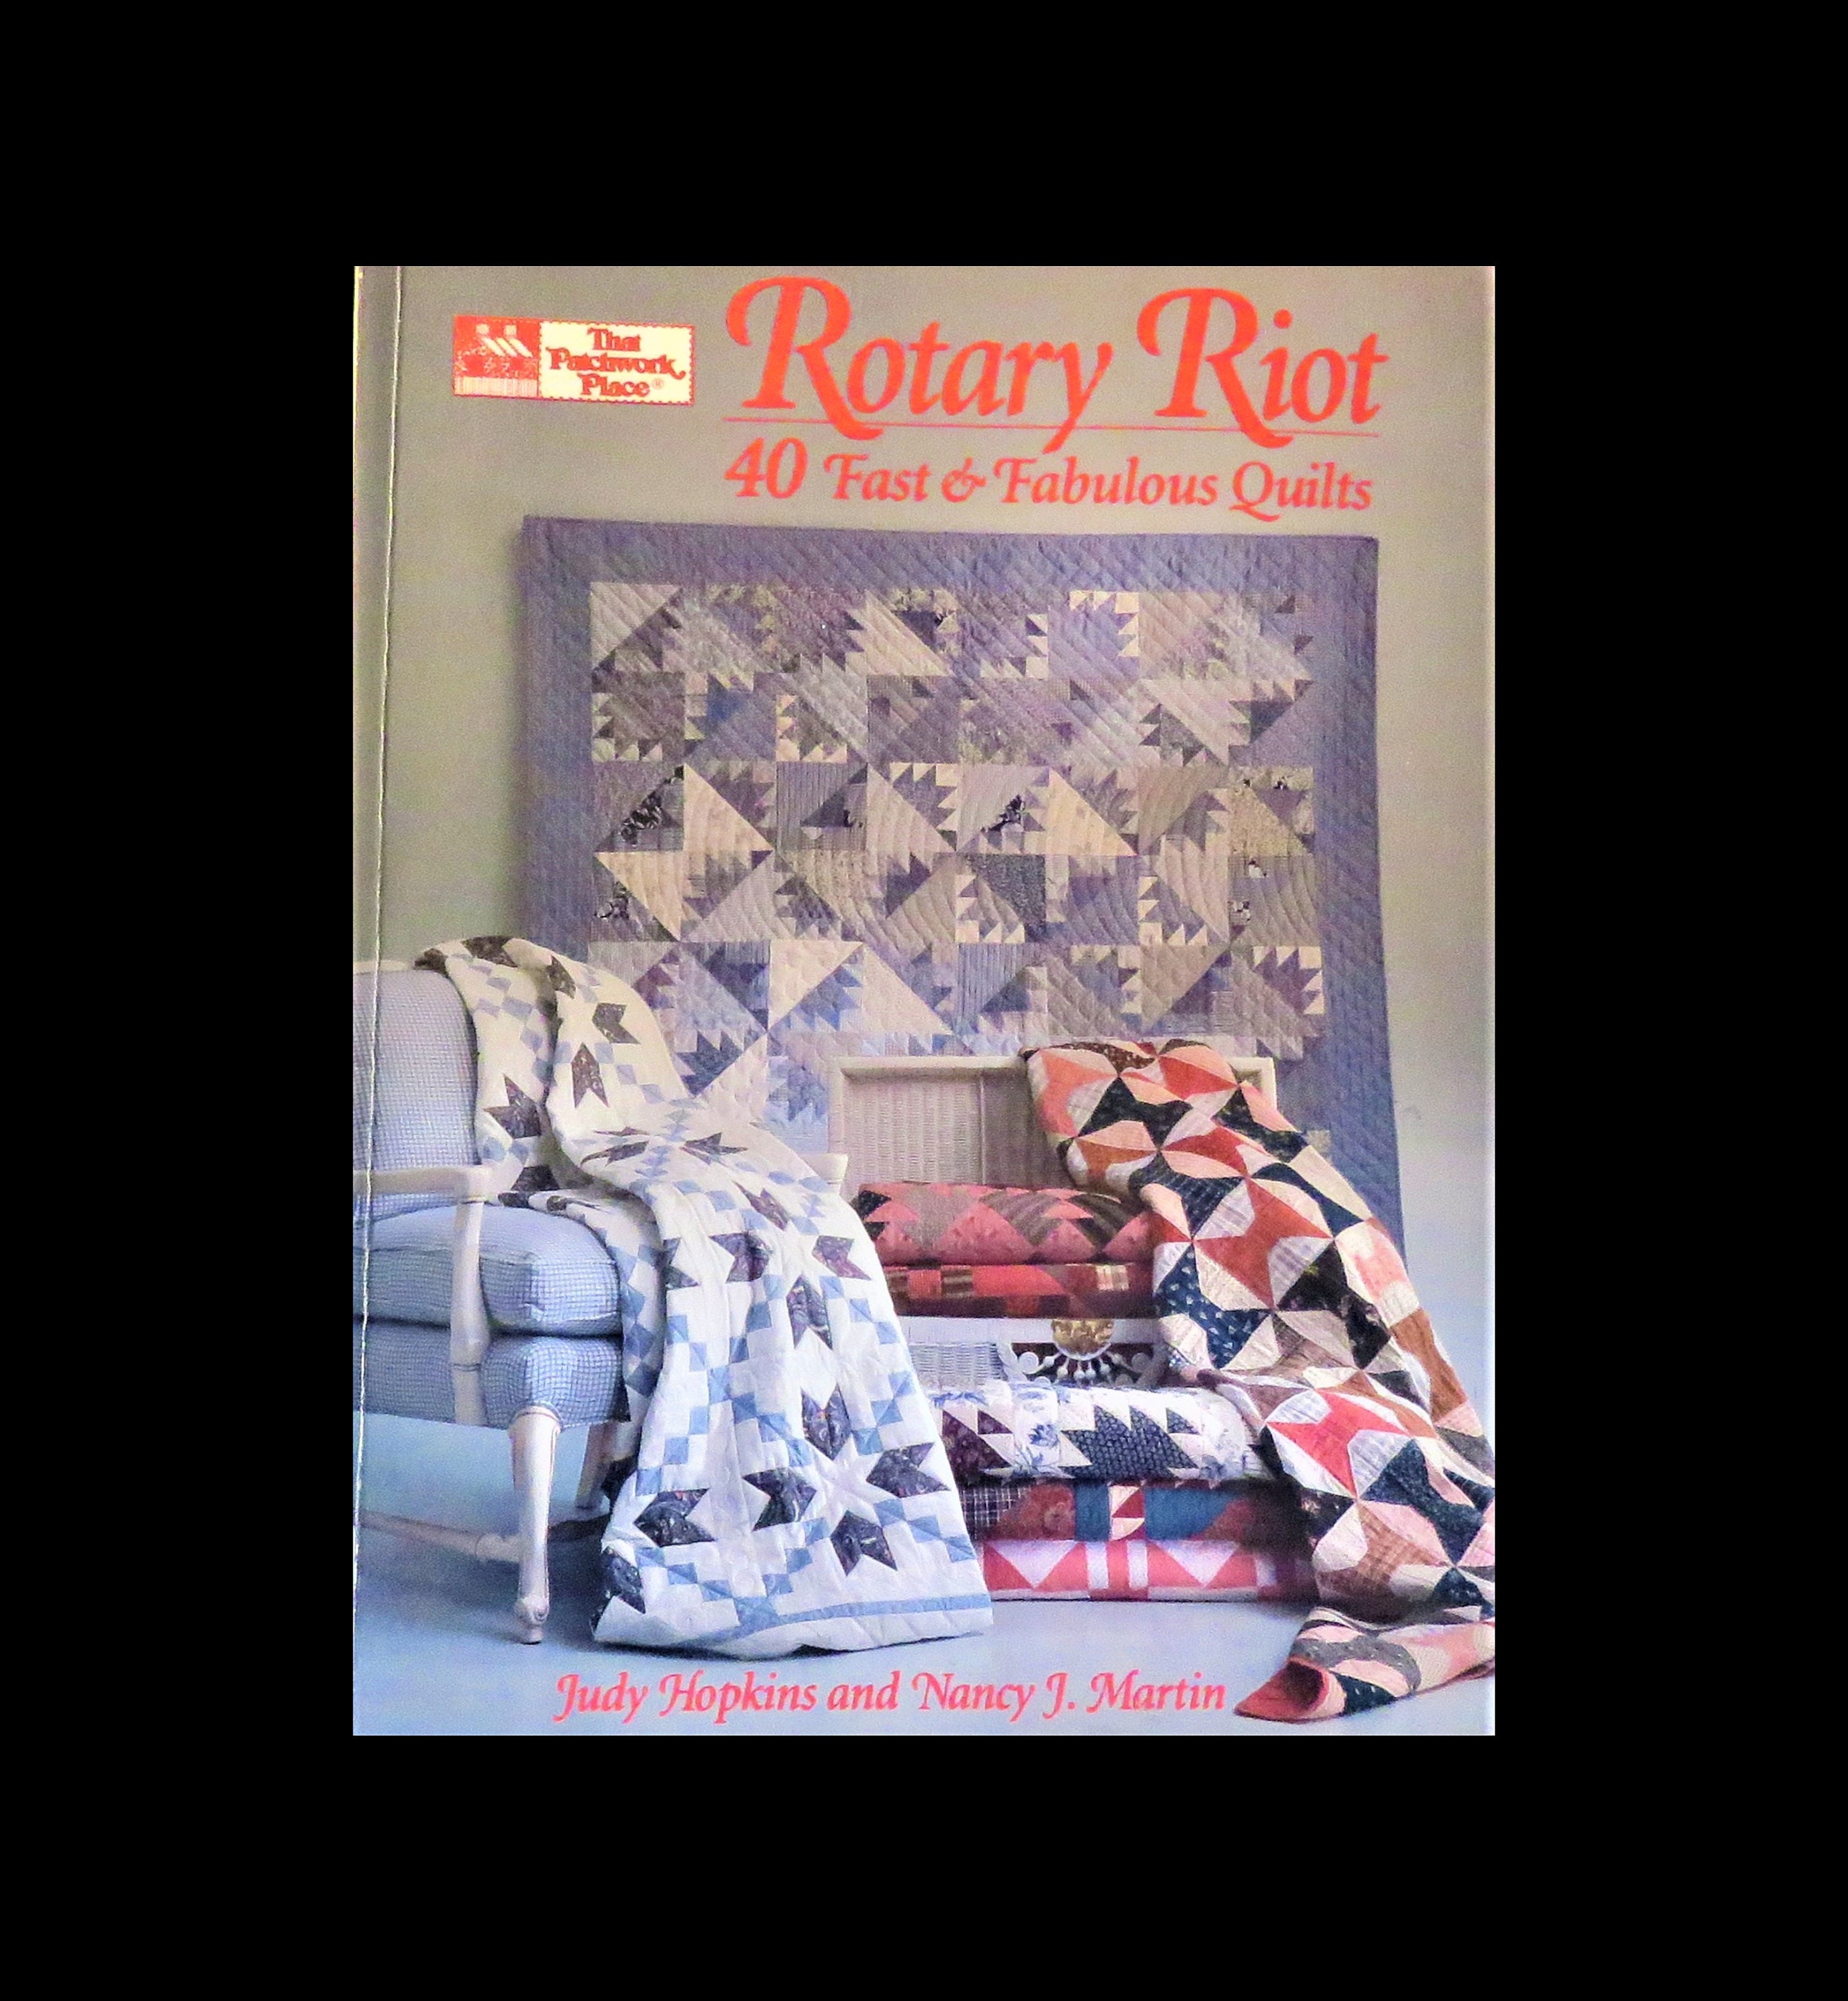 101 Fabulous Rotary-cut Quilts [Book]